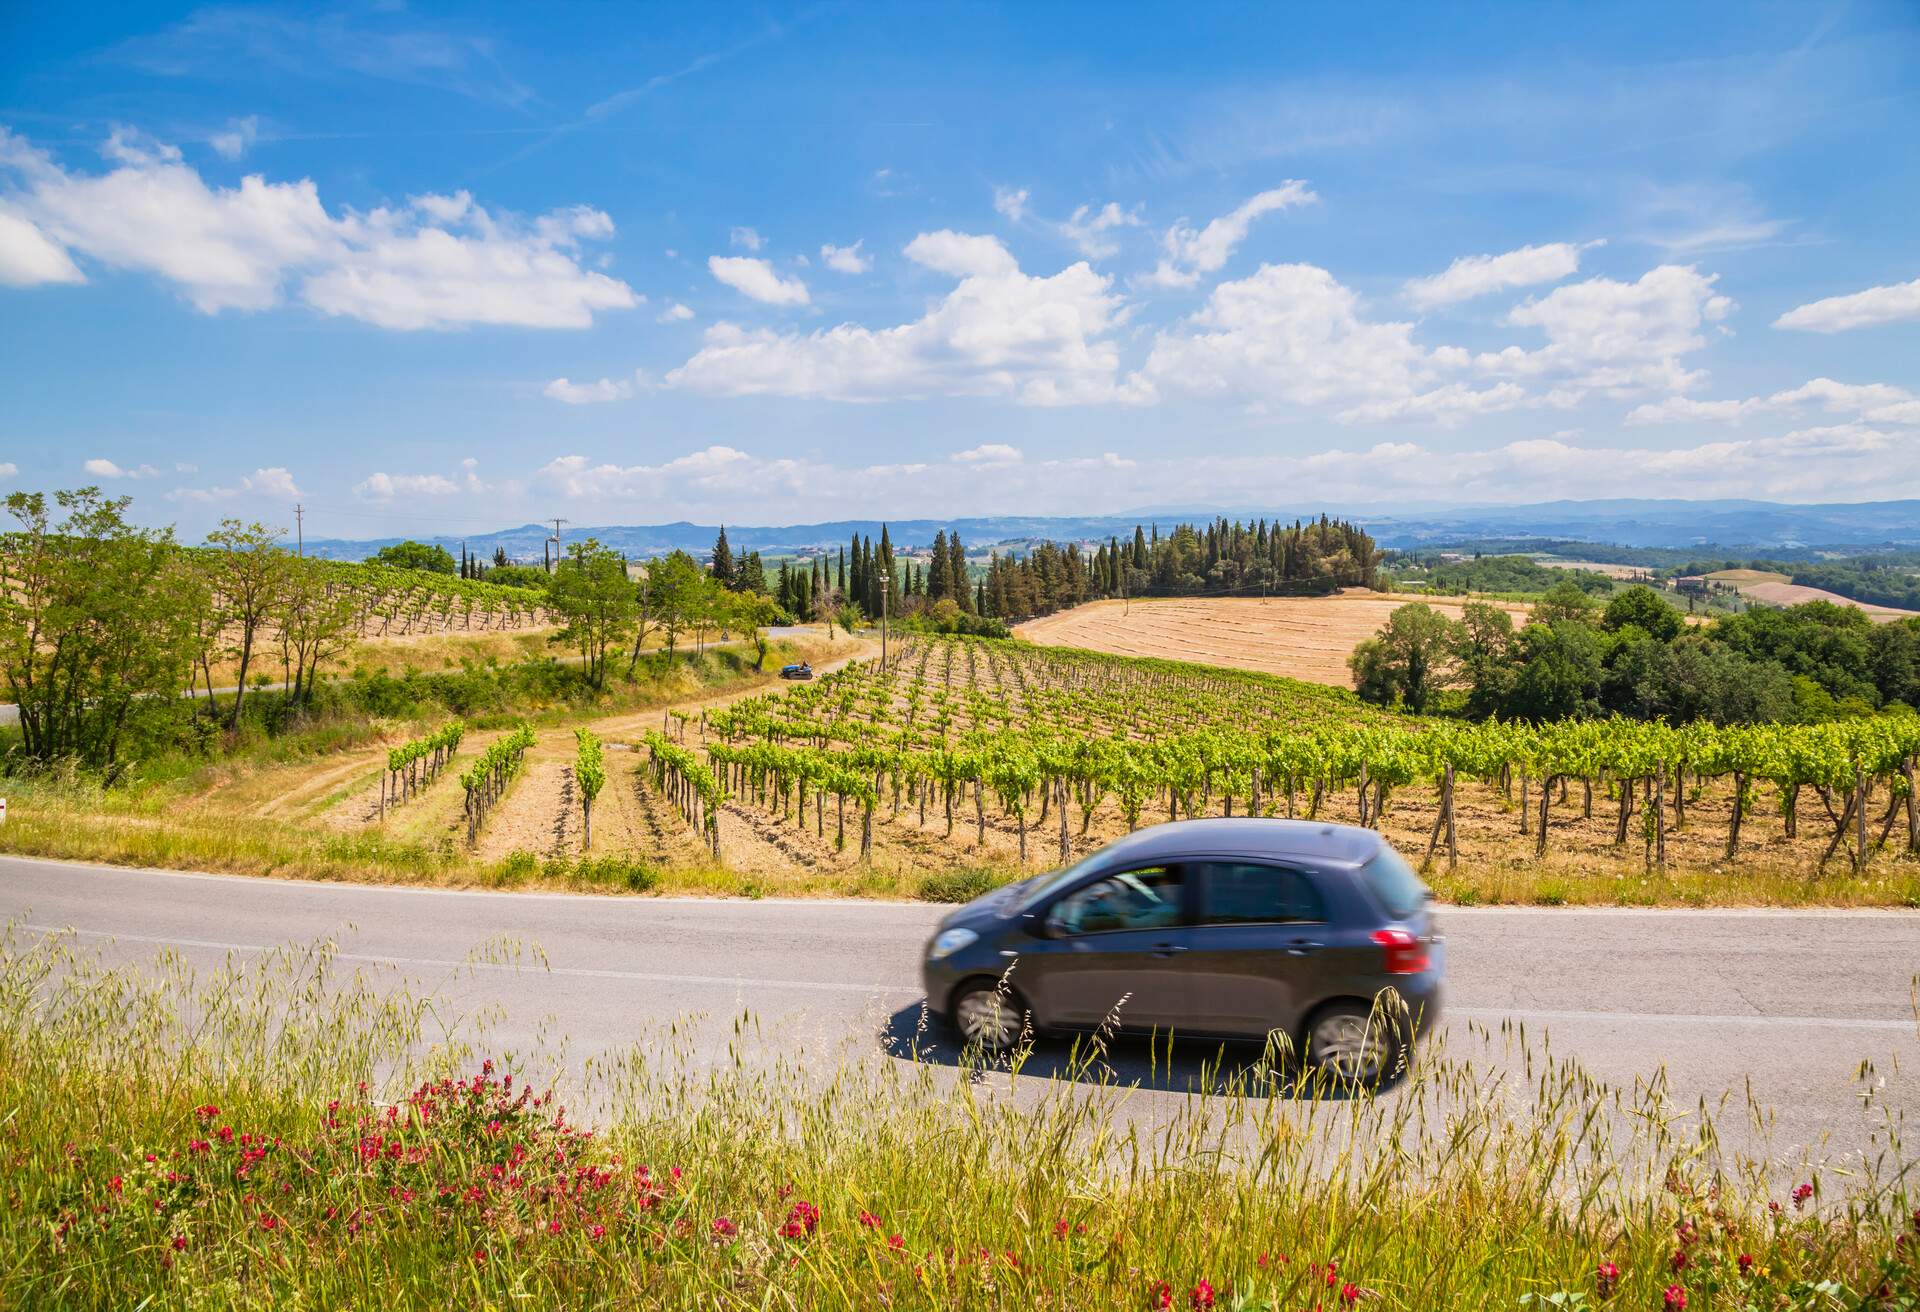 DEST_ITALY_TUSCANY_THEME_CAR_DRIVING_VINEYARDS-GettyImages-817519572